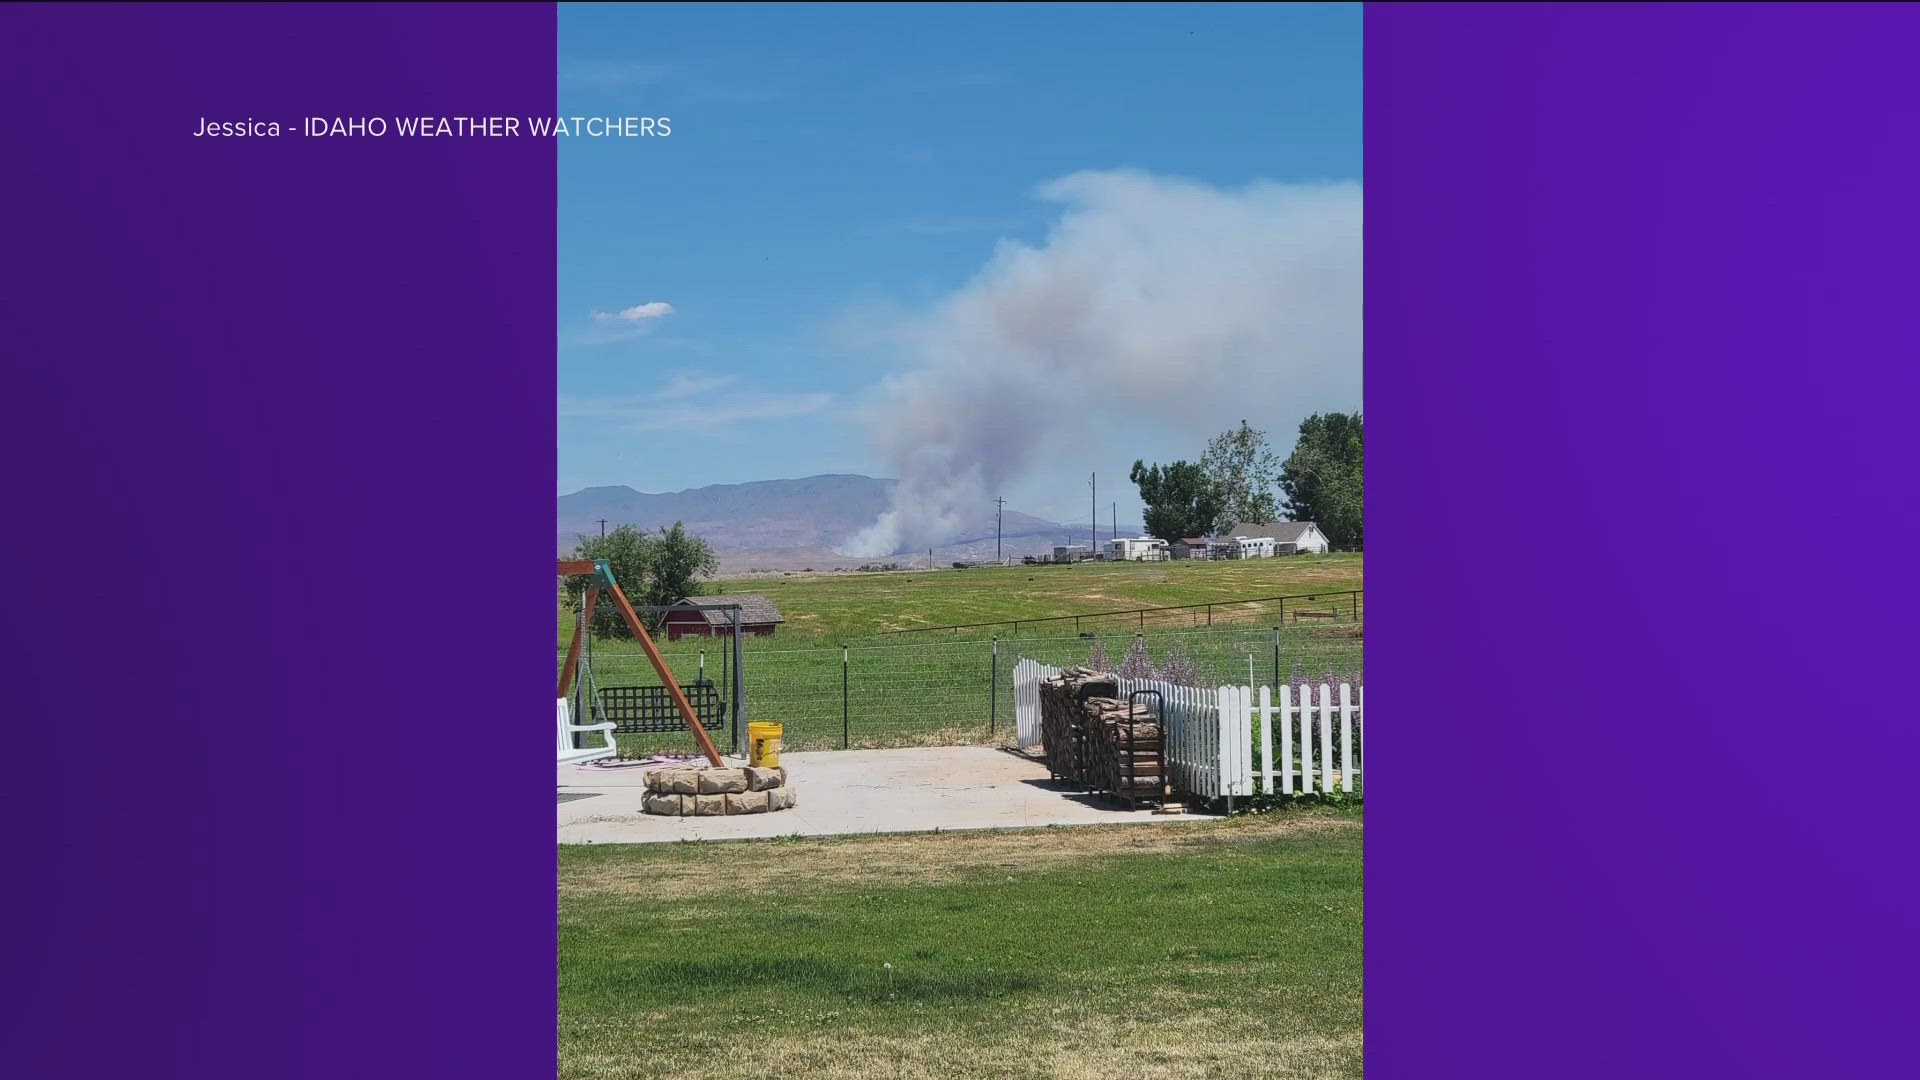 The Bureau of Land Management said they were assisting Gem County with the fire Friday afternoon.